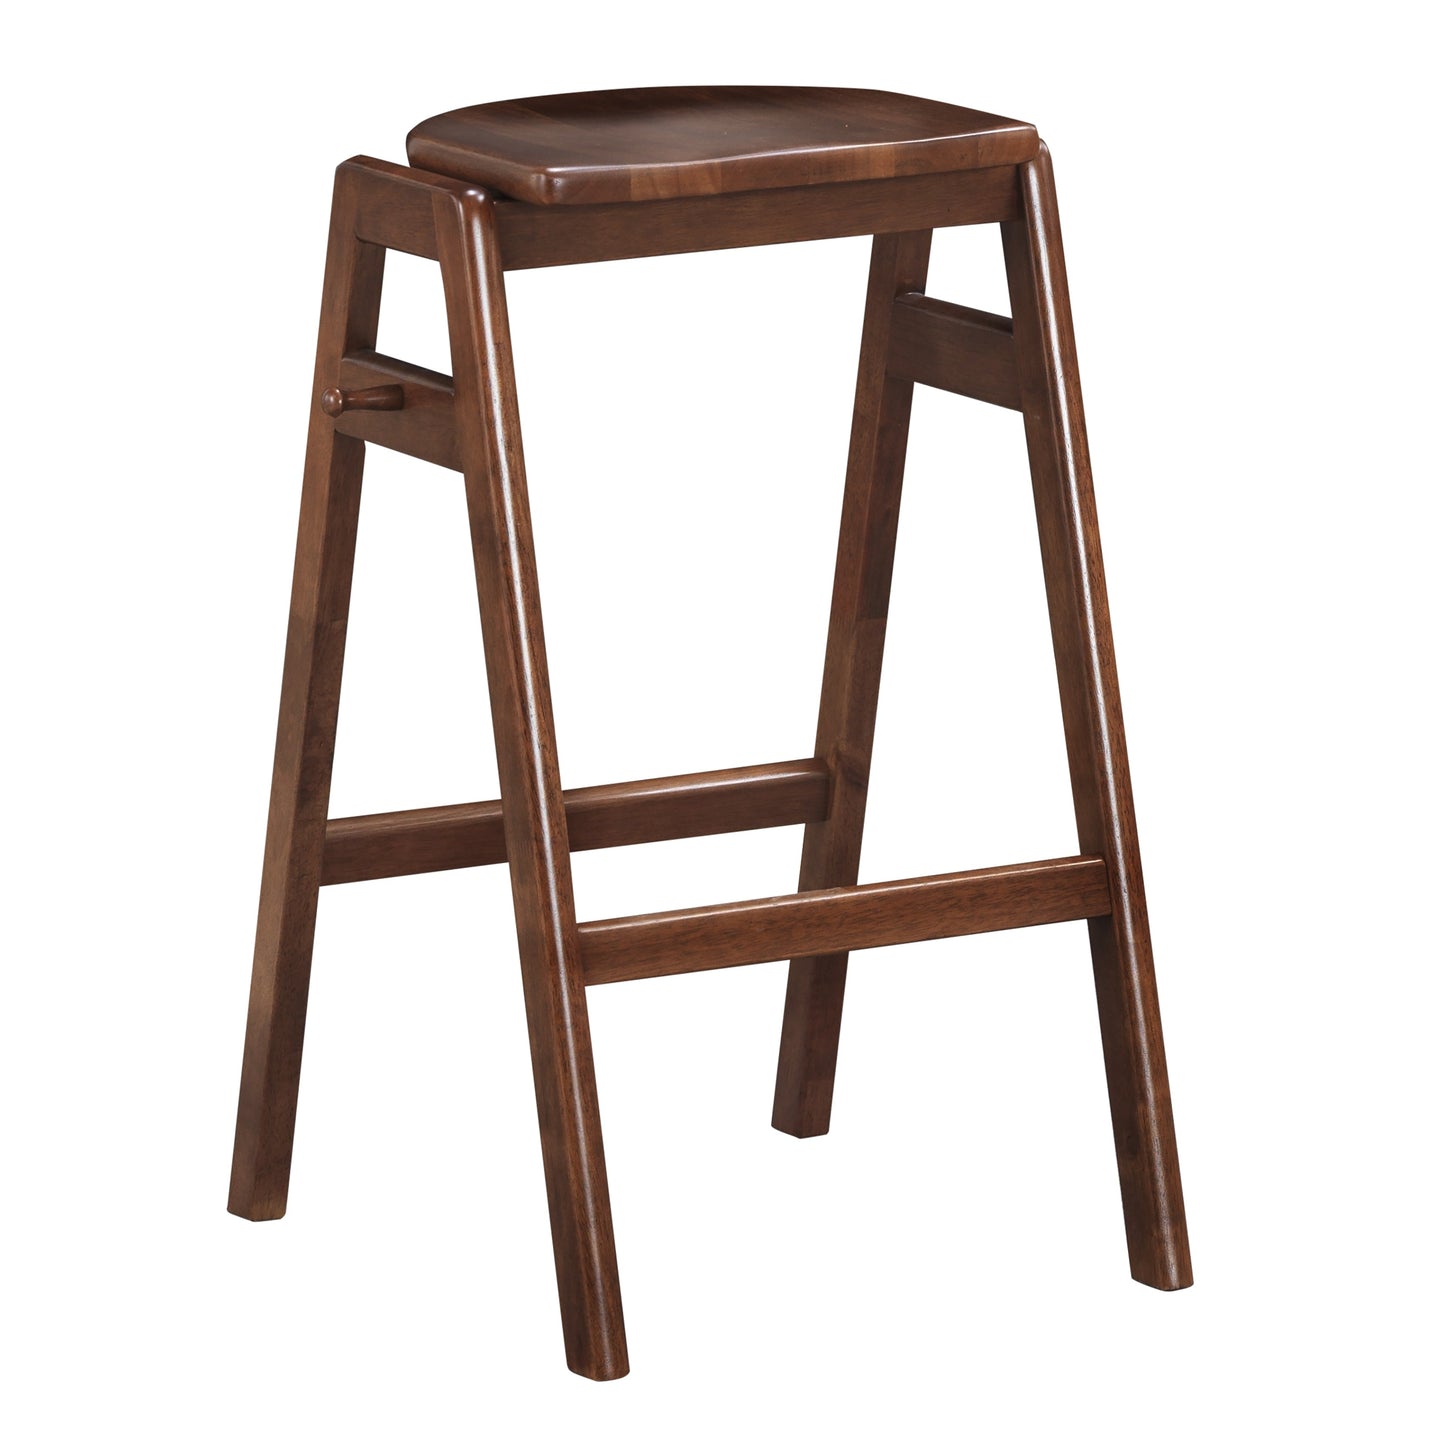 Malvern Wood Pub Table with Two Barstools